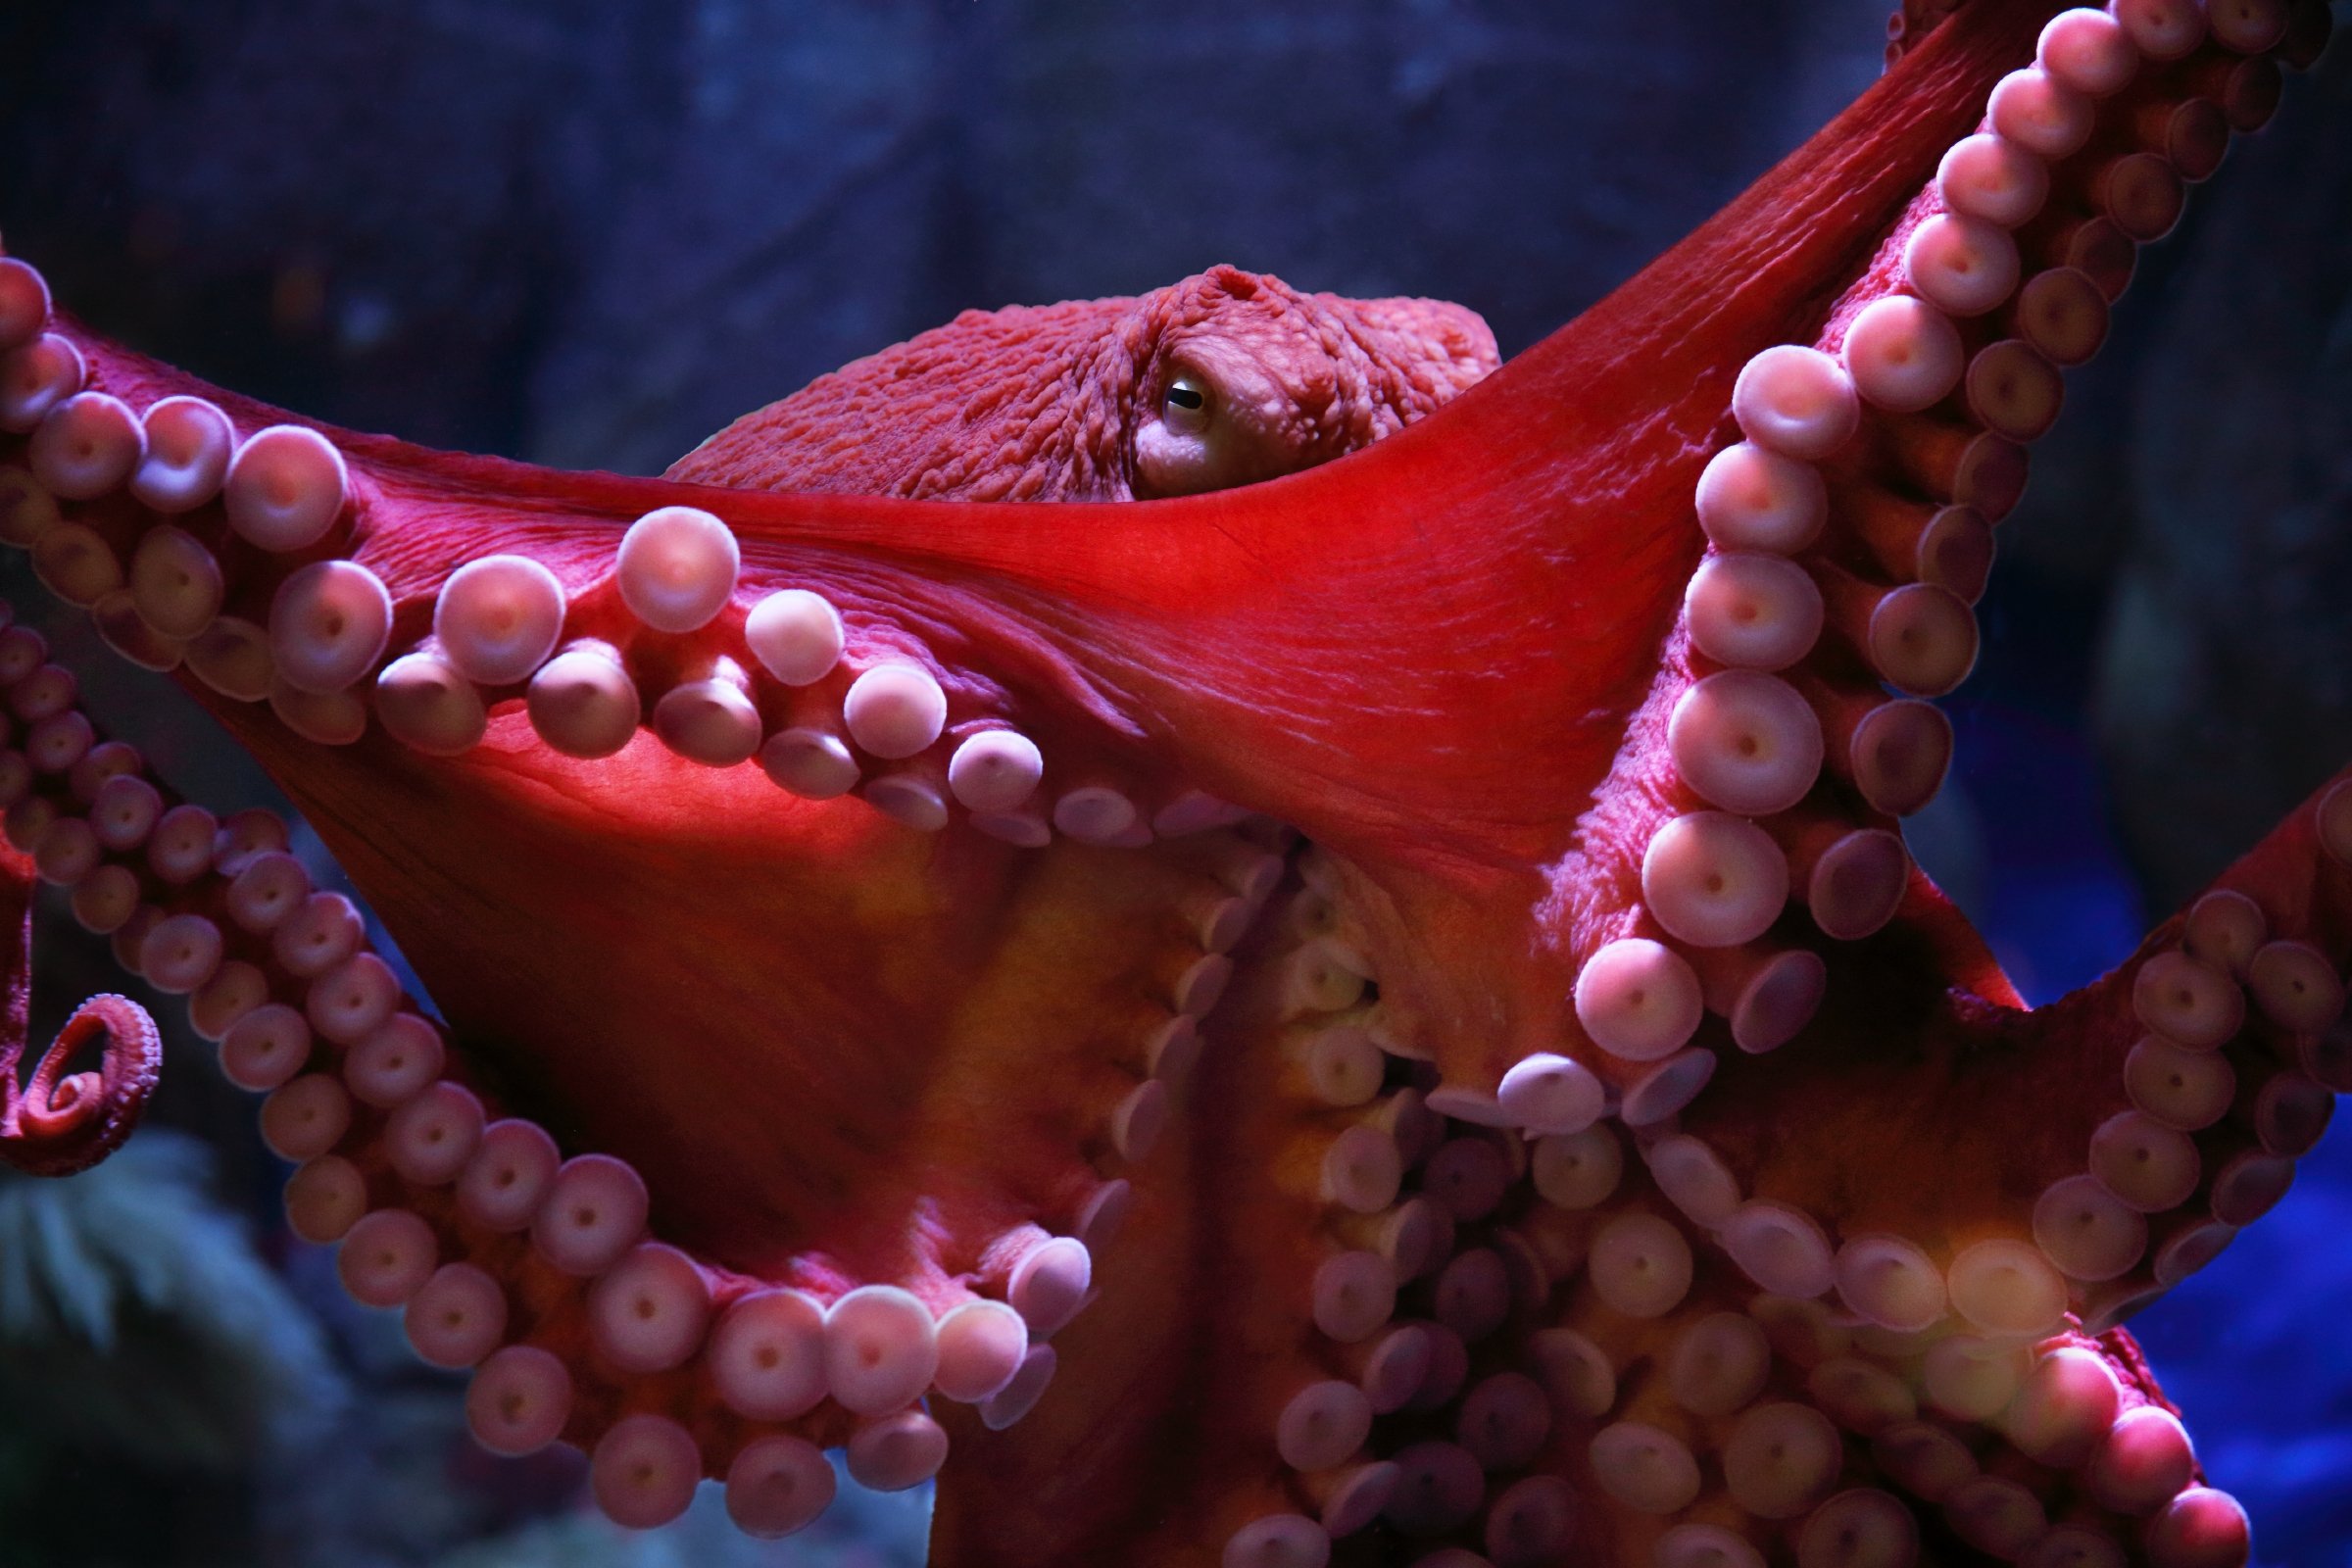 Giant Pacific octopus wallpaper from the Monterey Bay Aquarium